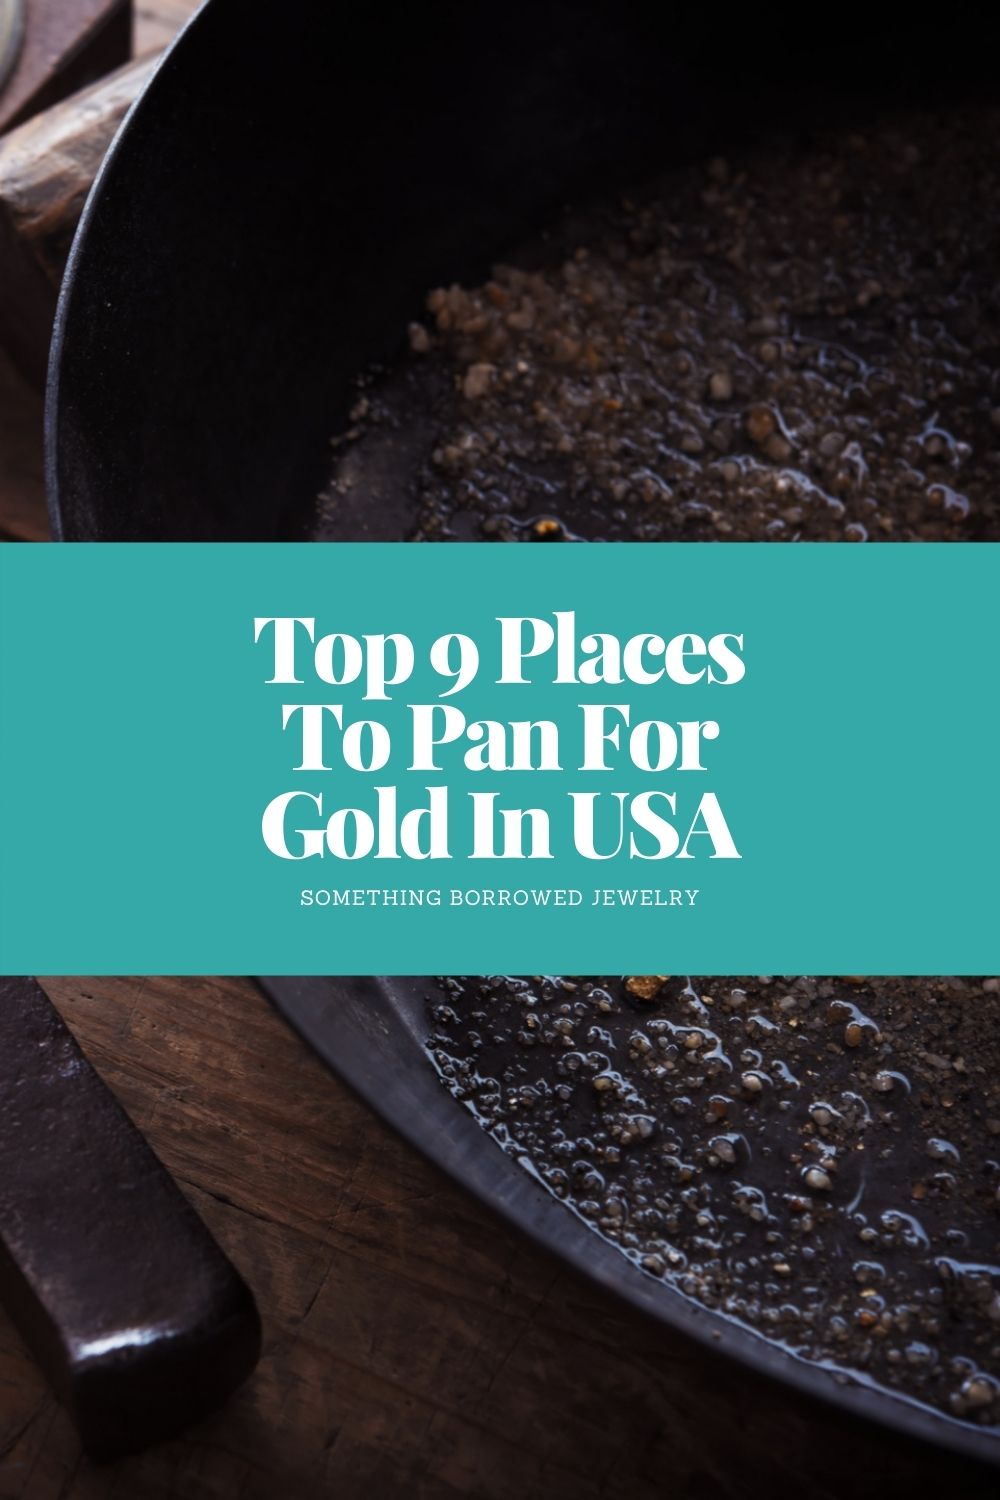 Top 9 Places To Pan For Gold In USA pin 2